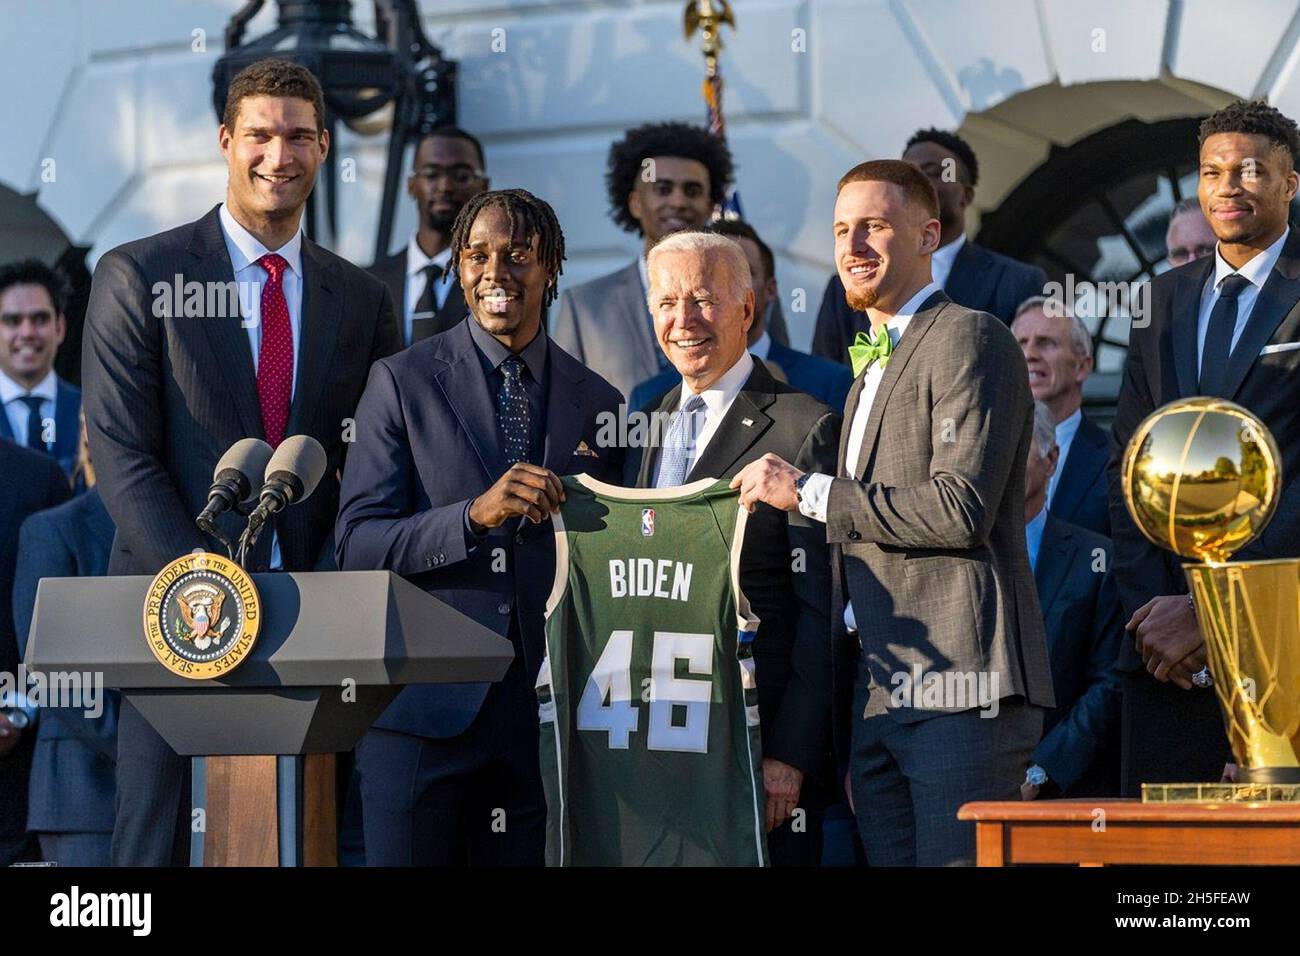 Washington, United States Of America. 08th Nov, 2021. Washington, United States of America. 08 November, 2021. U.S President Joe Biden is presented a team jersey during a gathering to celebrate the 2021 NBA Champion Milwaukee Bucks basketball team on the South Lawn of the White House November 8, 2021 in Washington, DC Credit: Adam Schultz/White House Photo/Alamy Live News Stock Photo